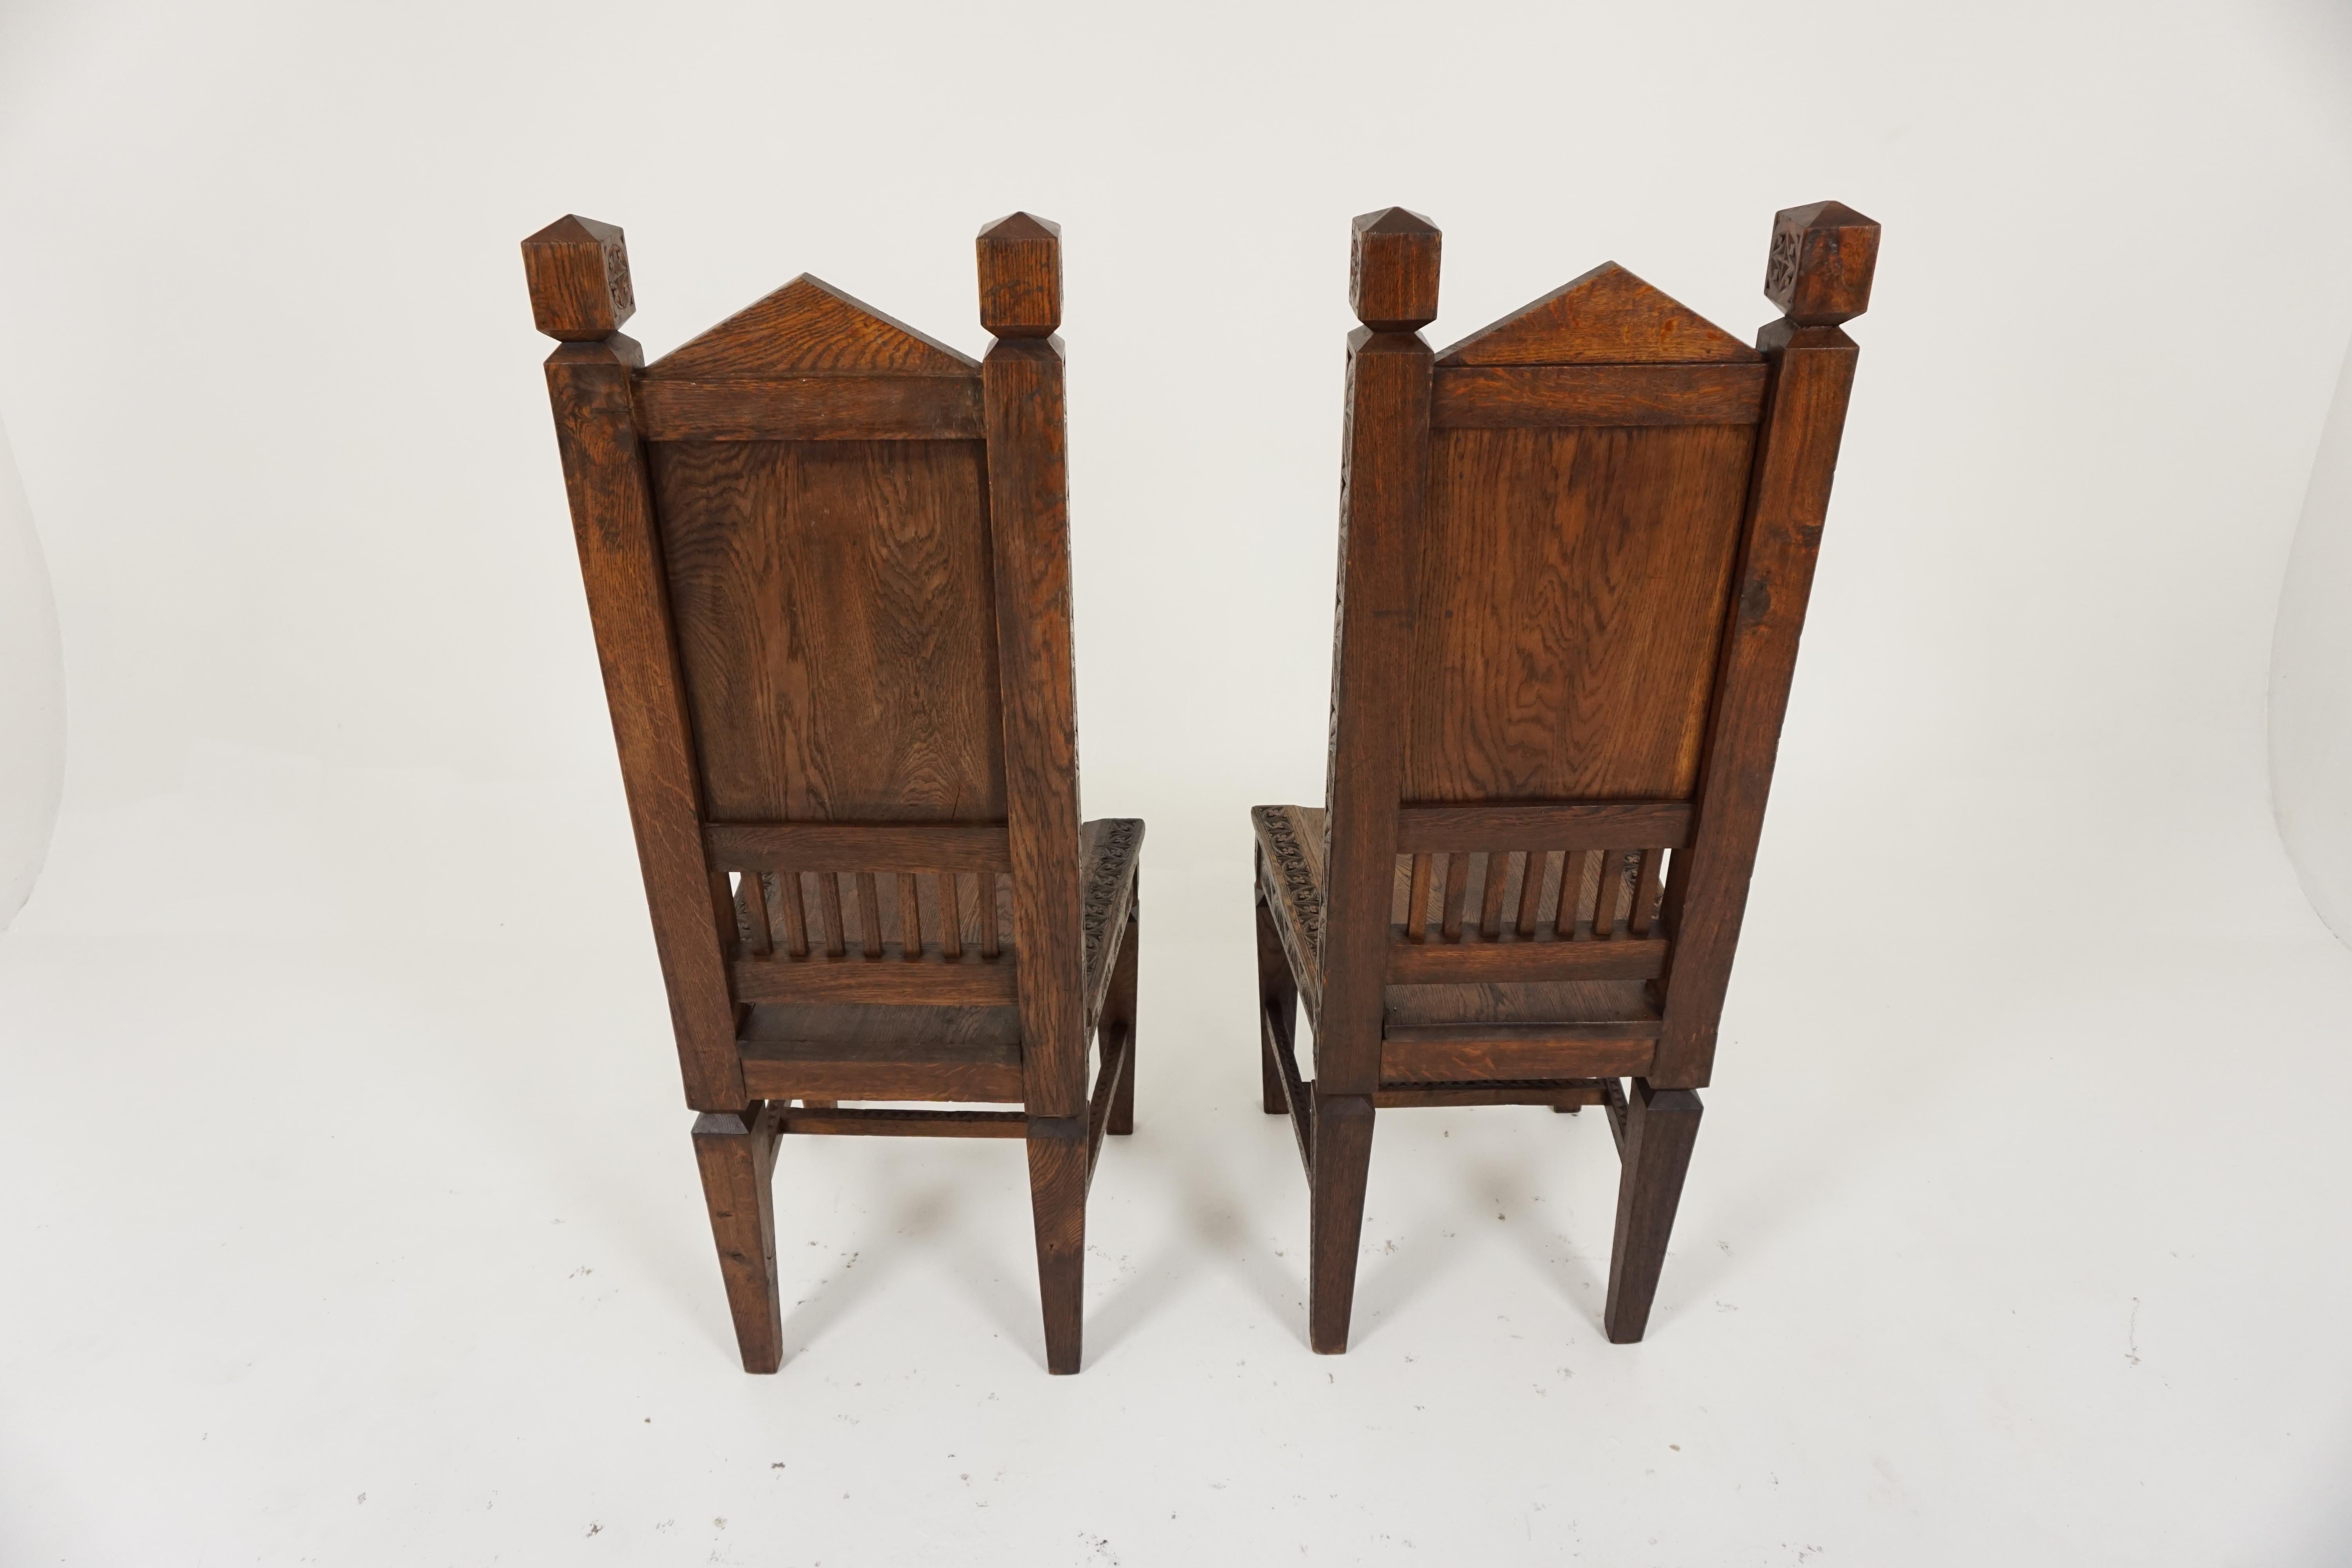 Hand-Crafted Pair of Antique Oak Chairs, Heavily Carved Hall Chairs, Scotland 1890, B1807